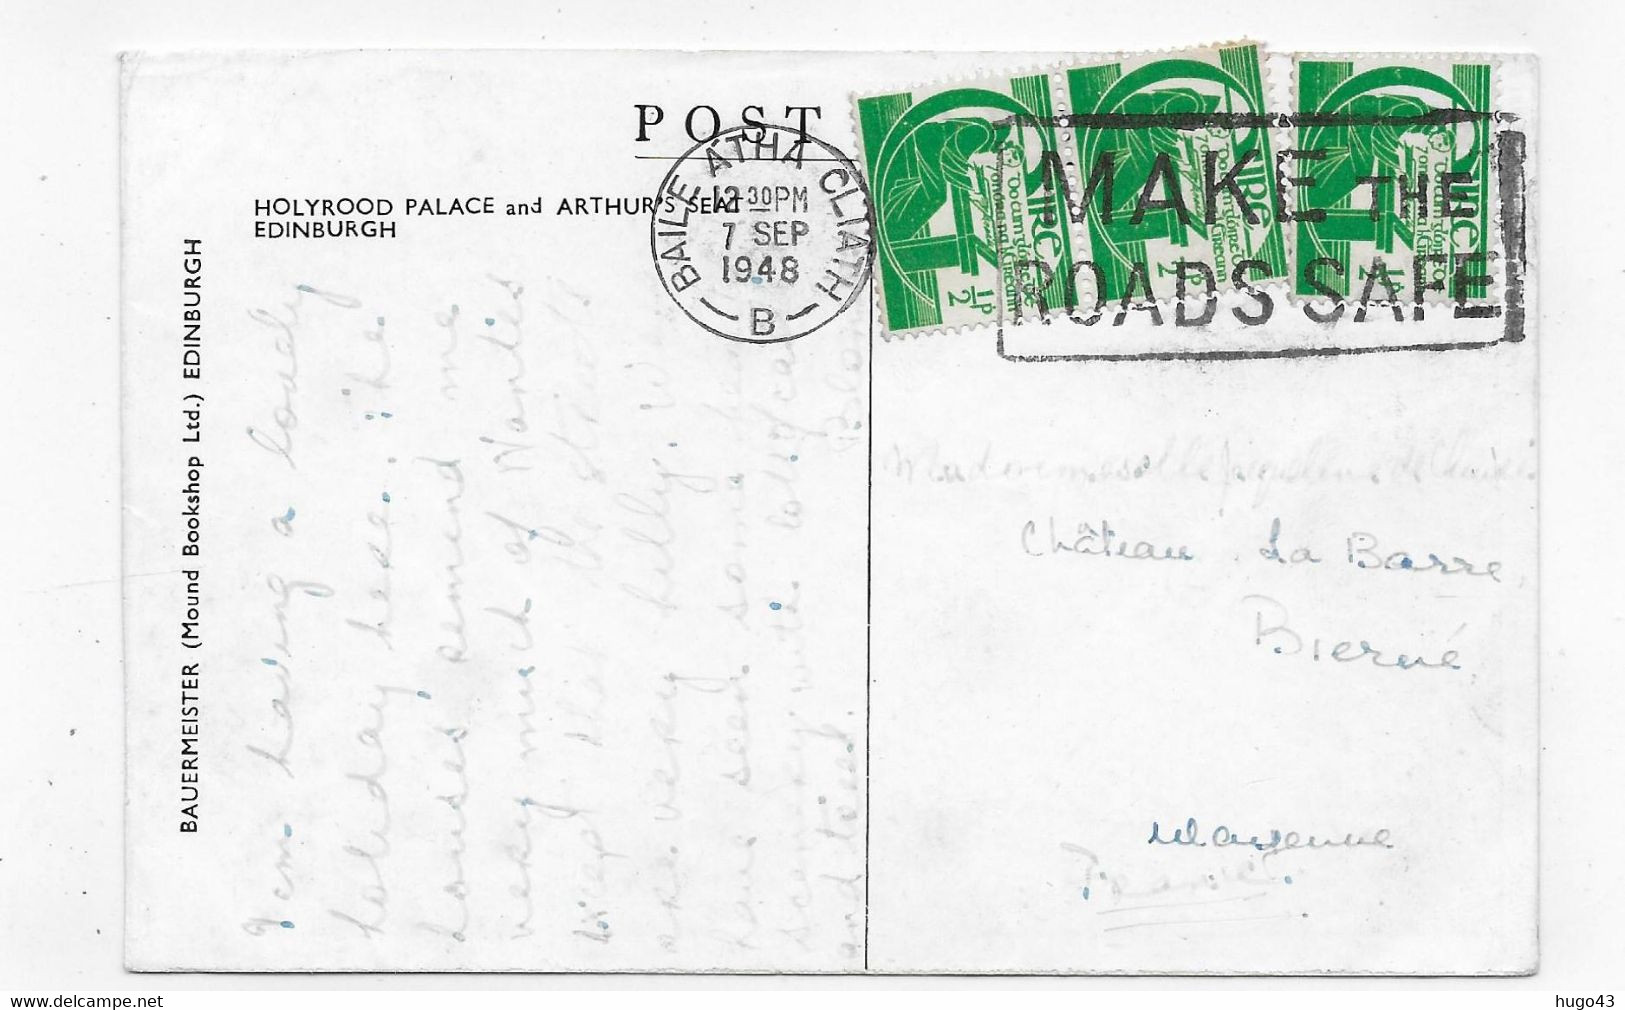 (RECTO / VERSO) EDINBURGH EN 1948 - HOLYROOD PALACE AND ARTHUR'S SAT - BEAUX TIMBRES D' IRLANDE - FORMAT CPA - East Lothian